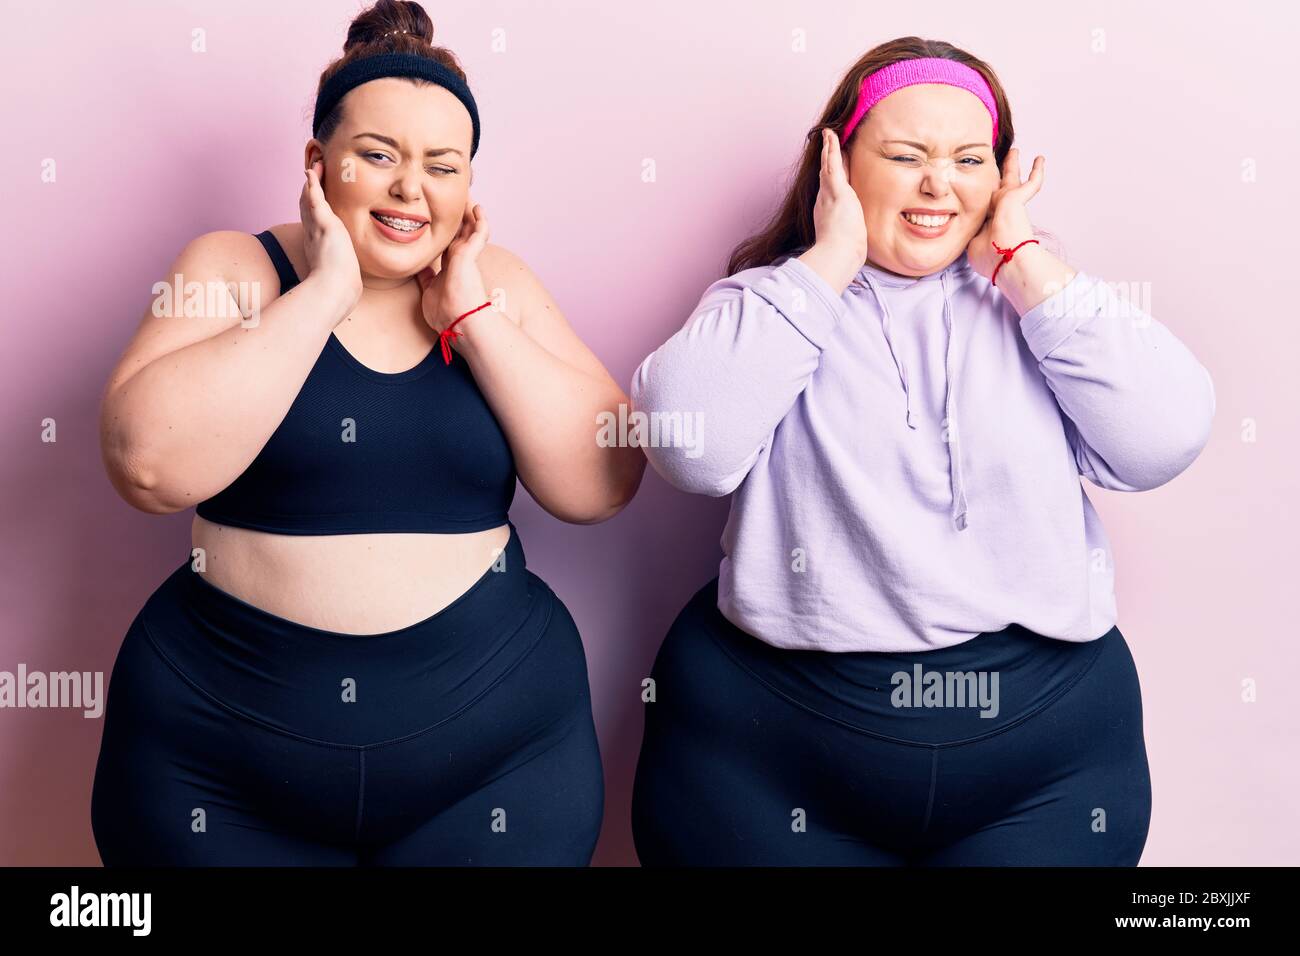 young-plus-size-twins-wearing-sportswear-covering-ears-with-fingers-with-annoyed-expression-for-the-noise-of-loud-music-deaf-concept-2BXJJXF.jpg